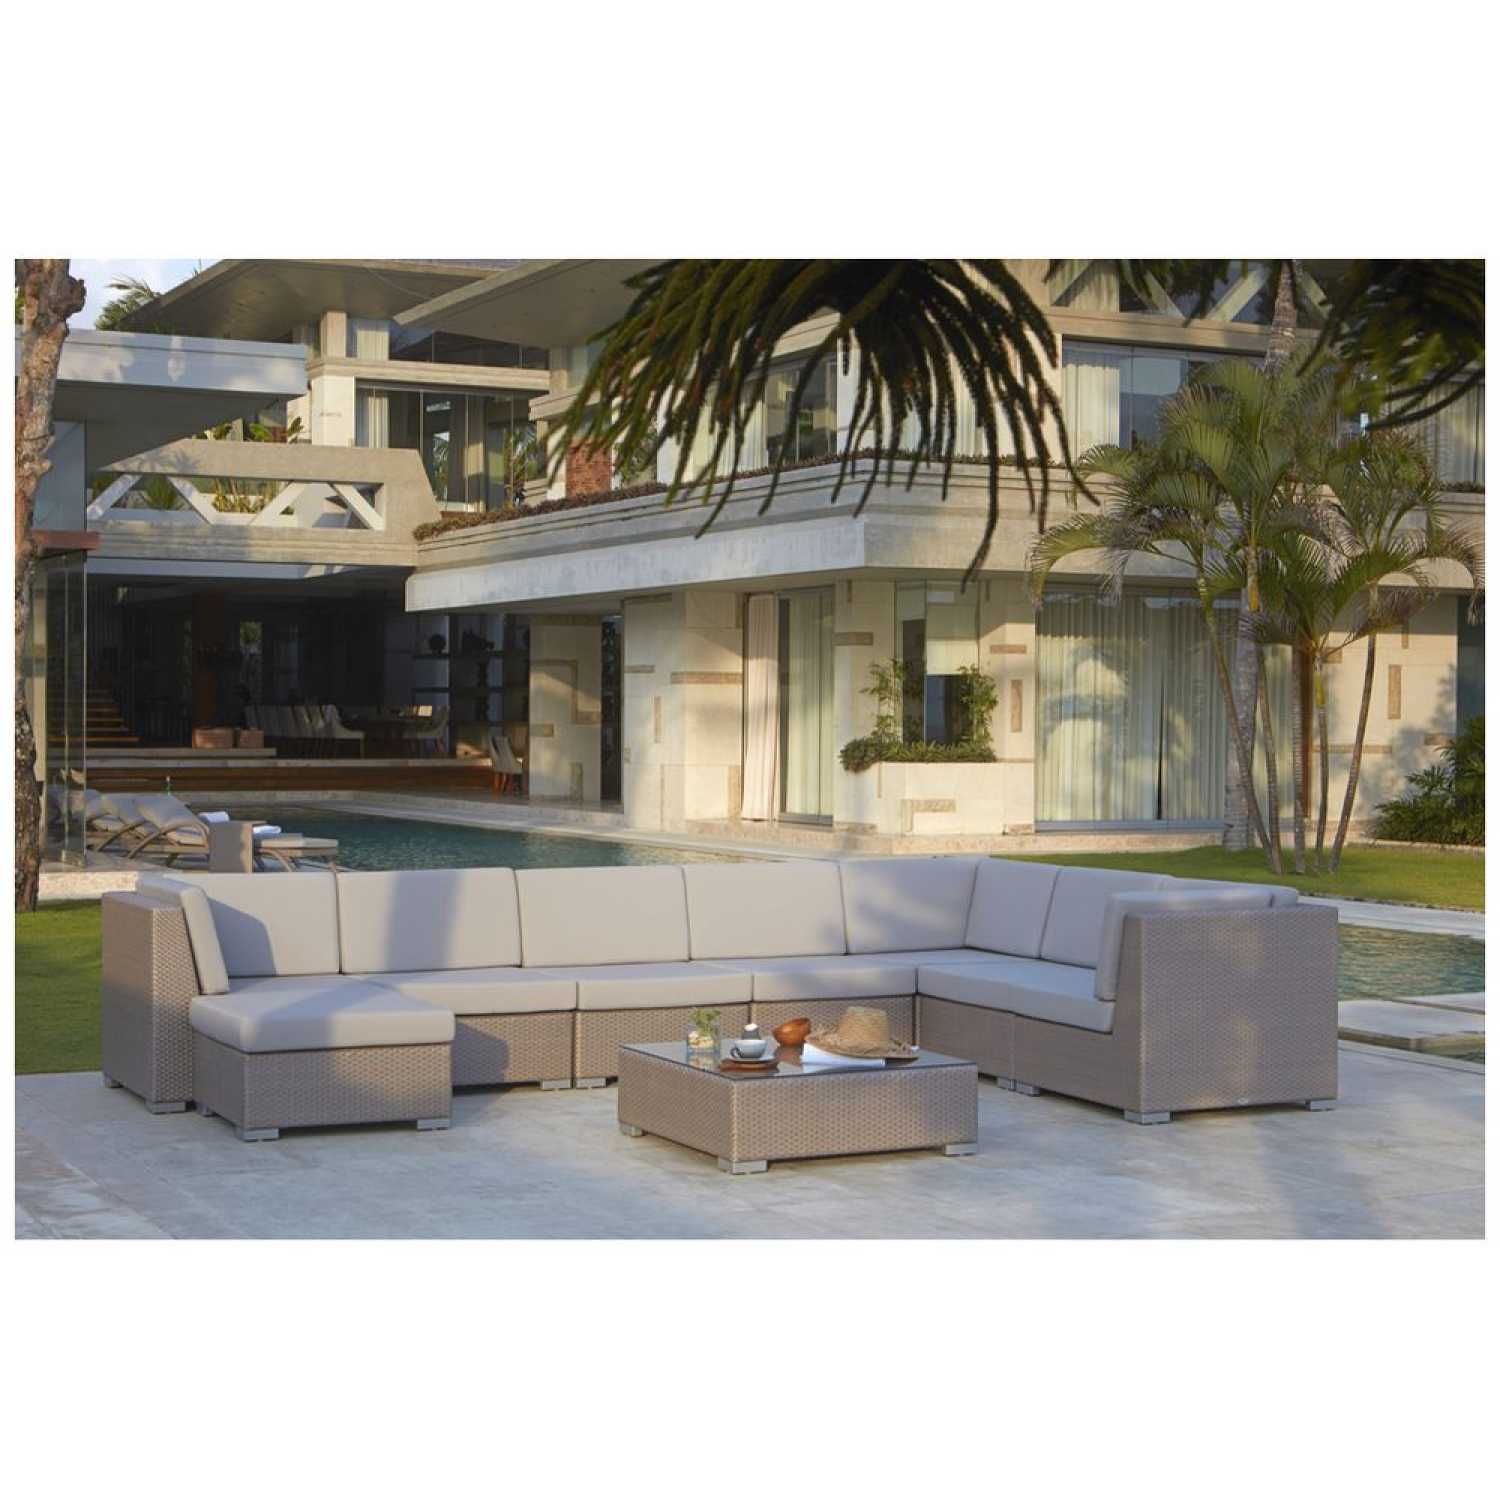 Pacific Silver Walnut Seat - PadioLiving - Pacific Silver Walnut Seat - Outdoor Corner Seat - PadioLiving